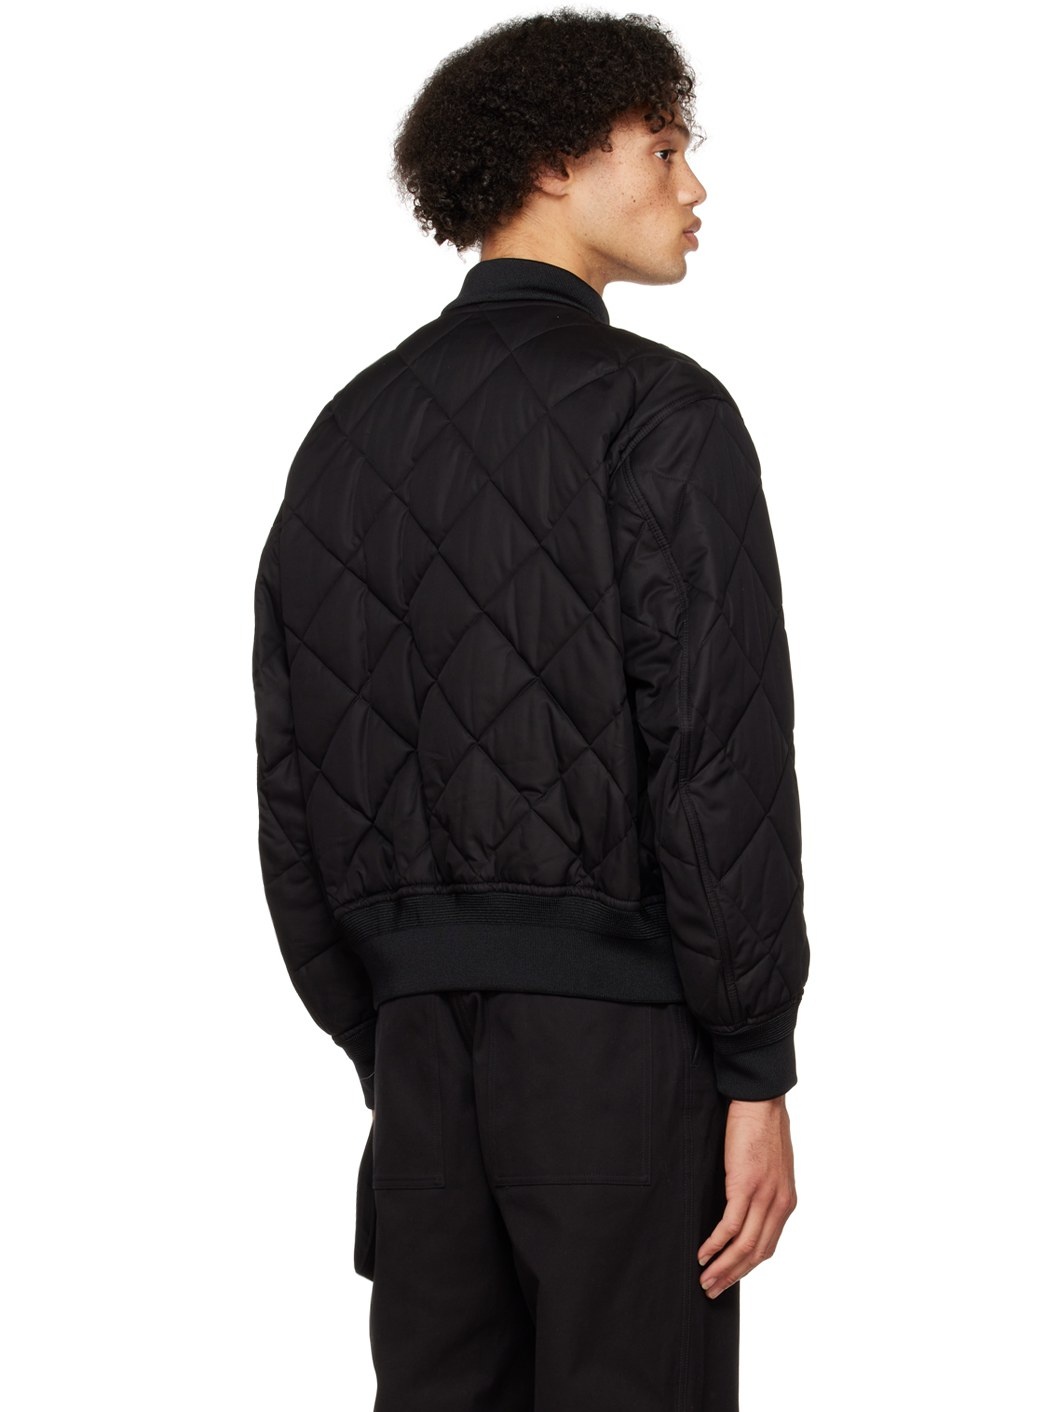 Black Diamond Quilted Bomber Jacket - 3